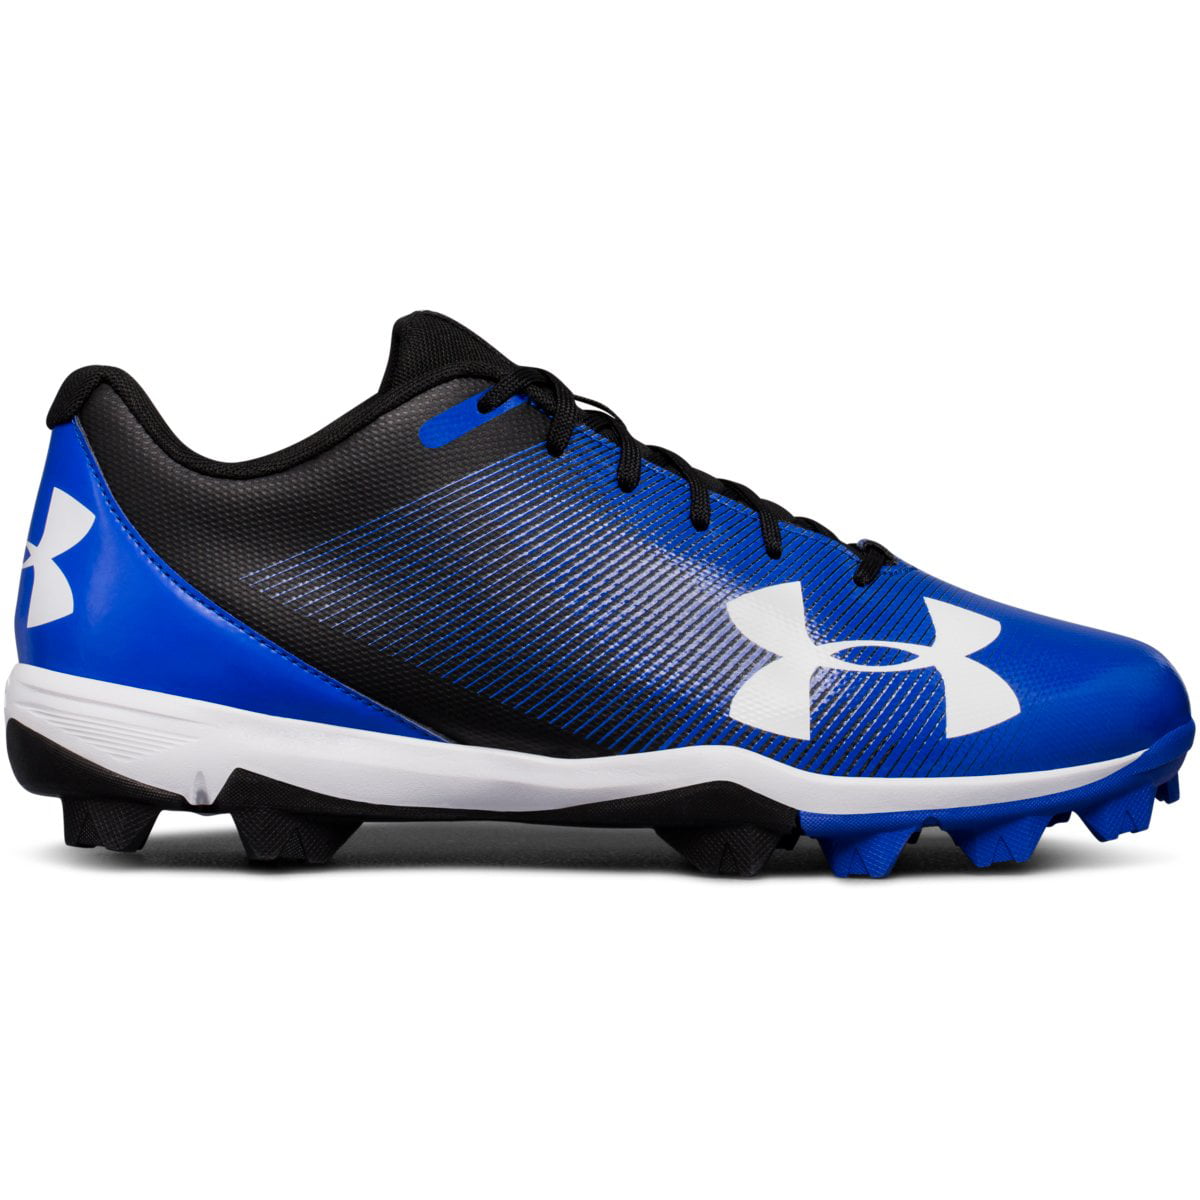 under armour youth baseball shoes